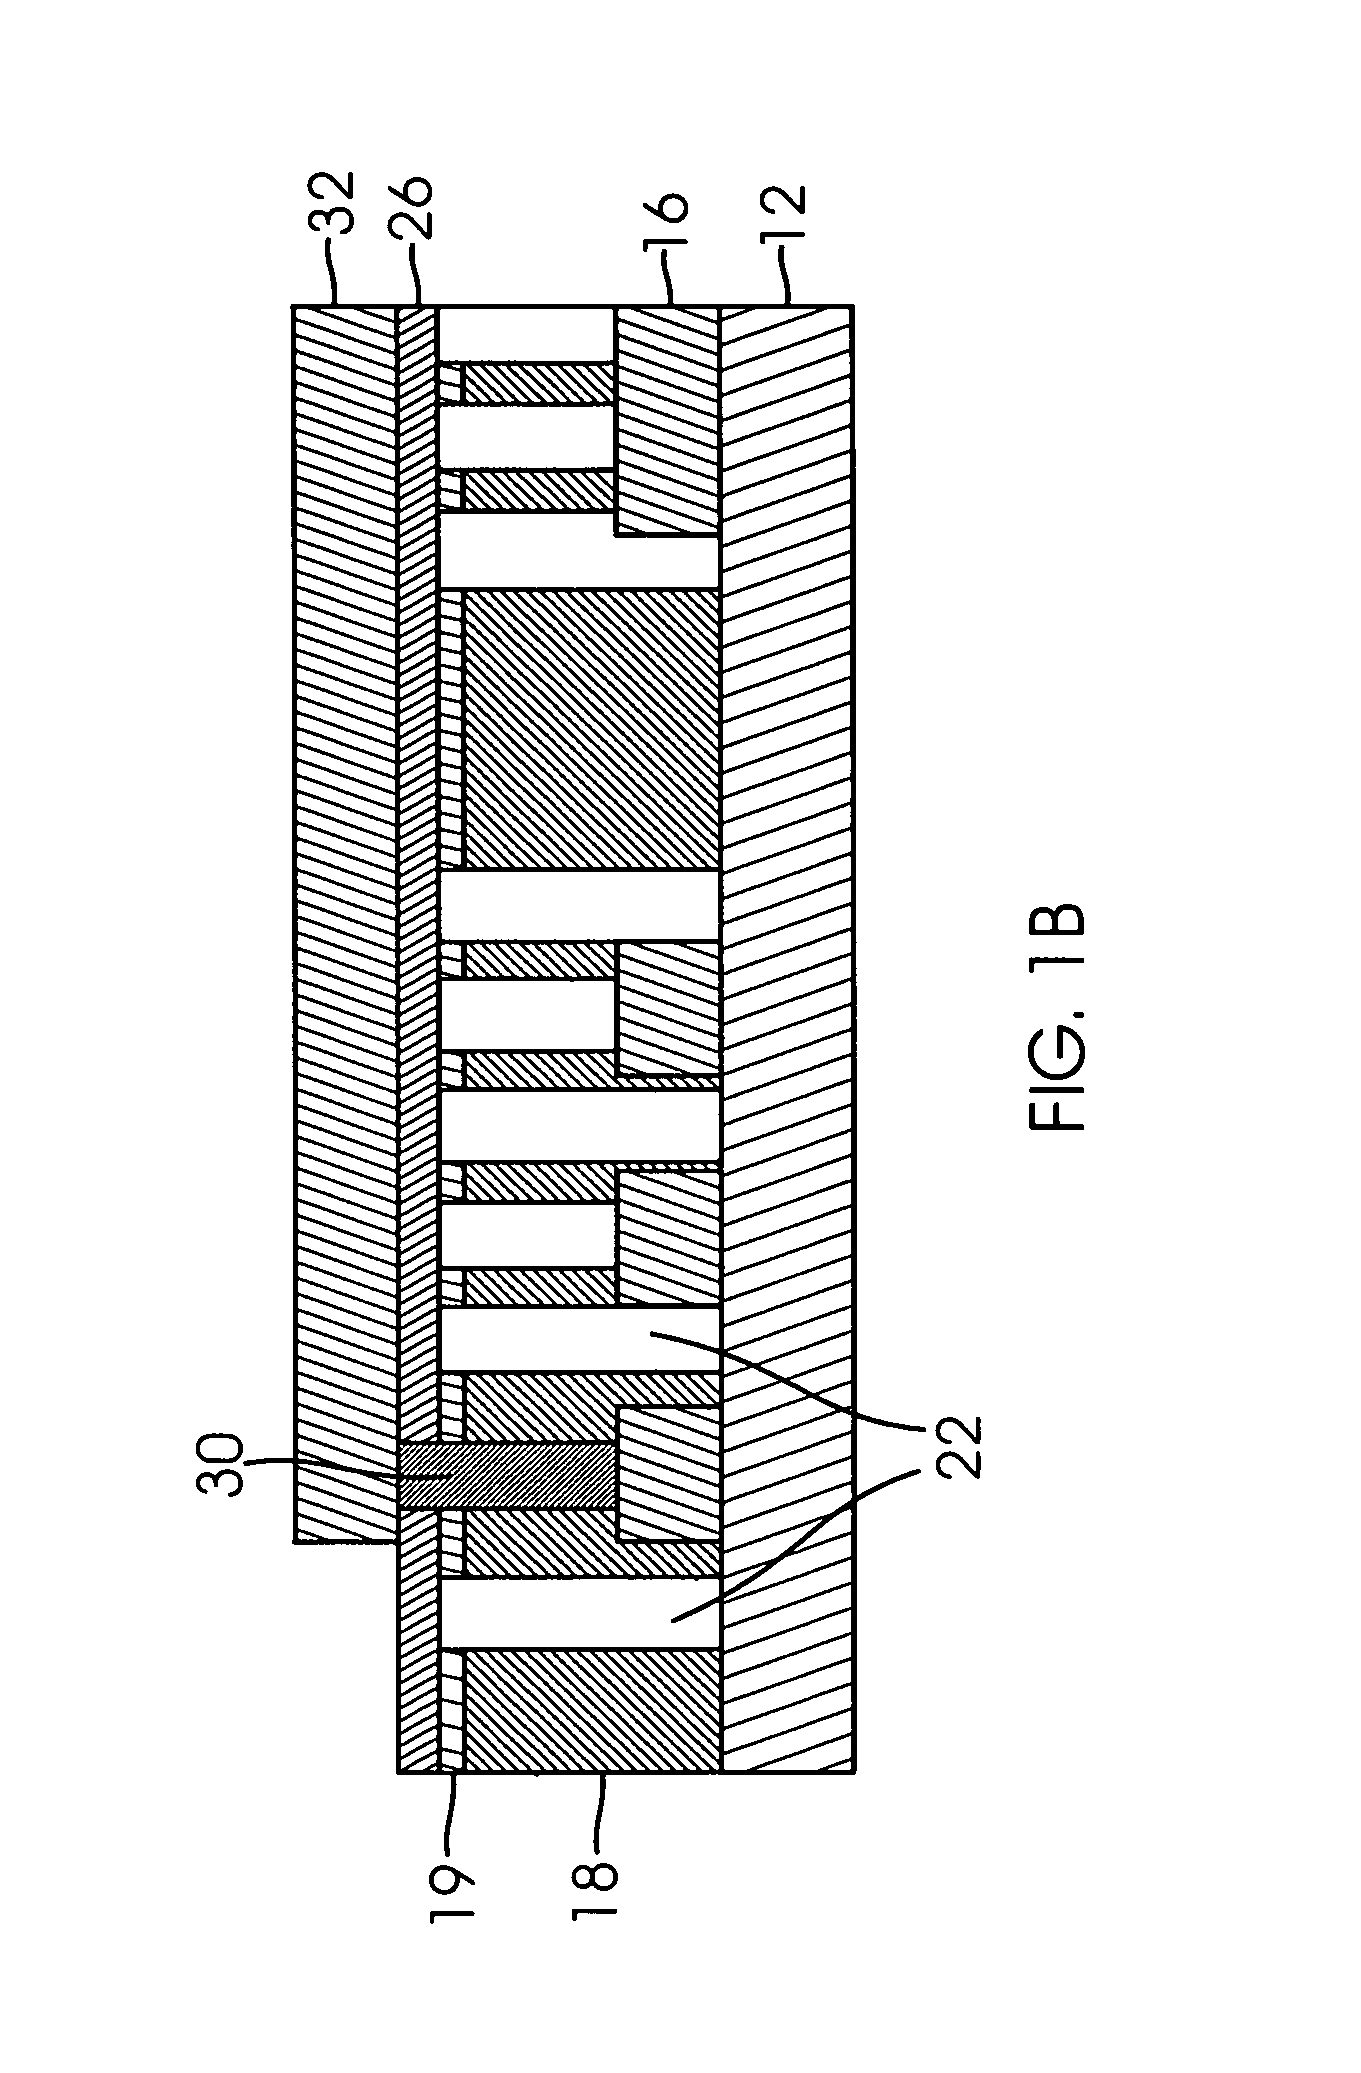 Method of fabricating an interconnect structure employing air gaps between metal lines and between metal layers